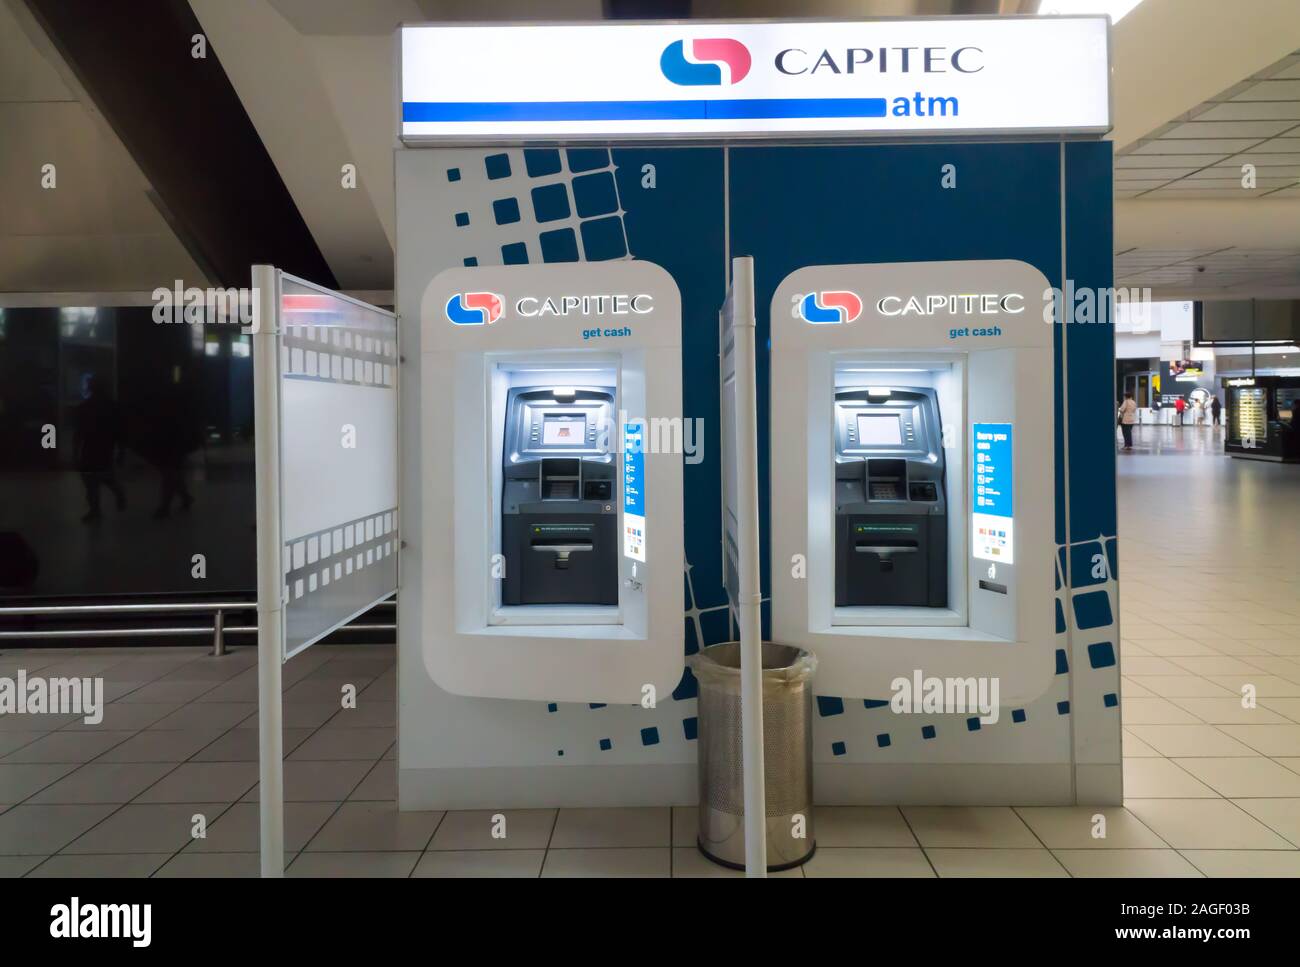 Capitec bank ATM at O R Tambo airport, Johannesburg, South Africa concept banking in Africa Stock Photo